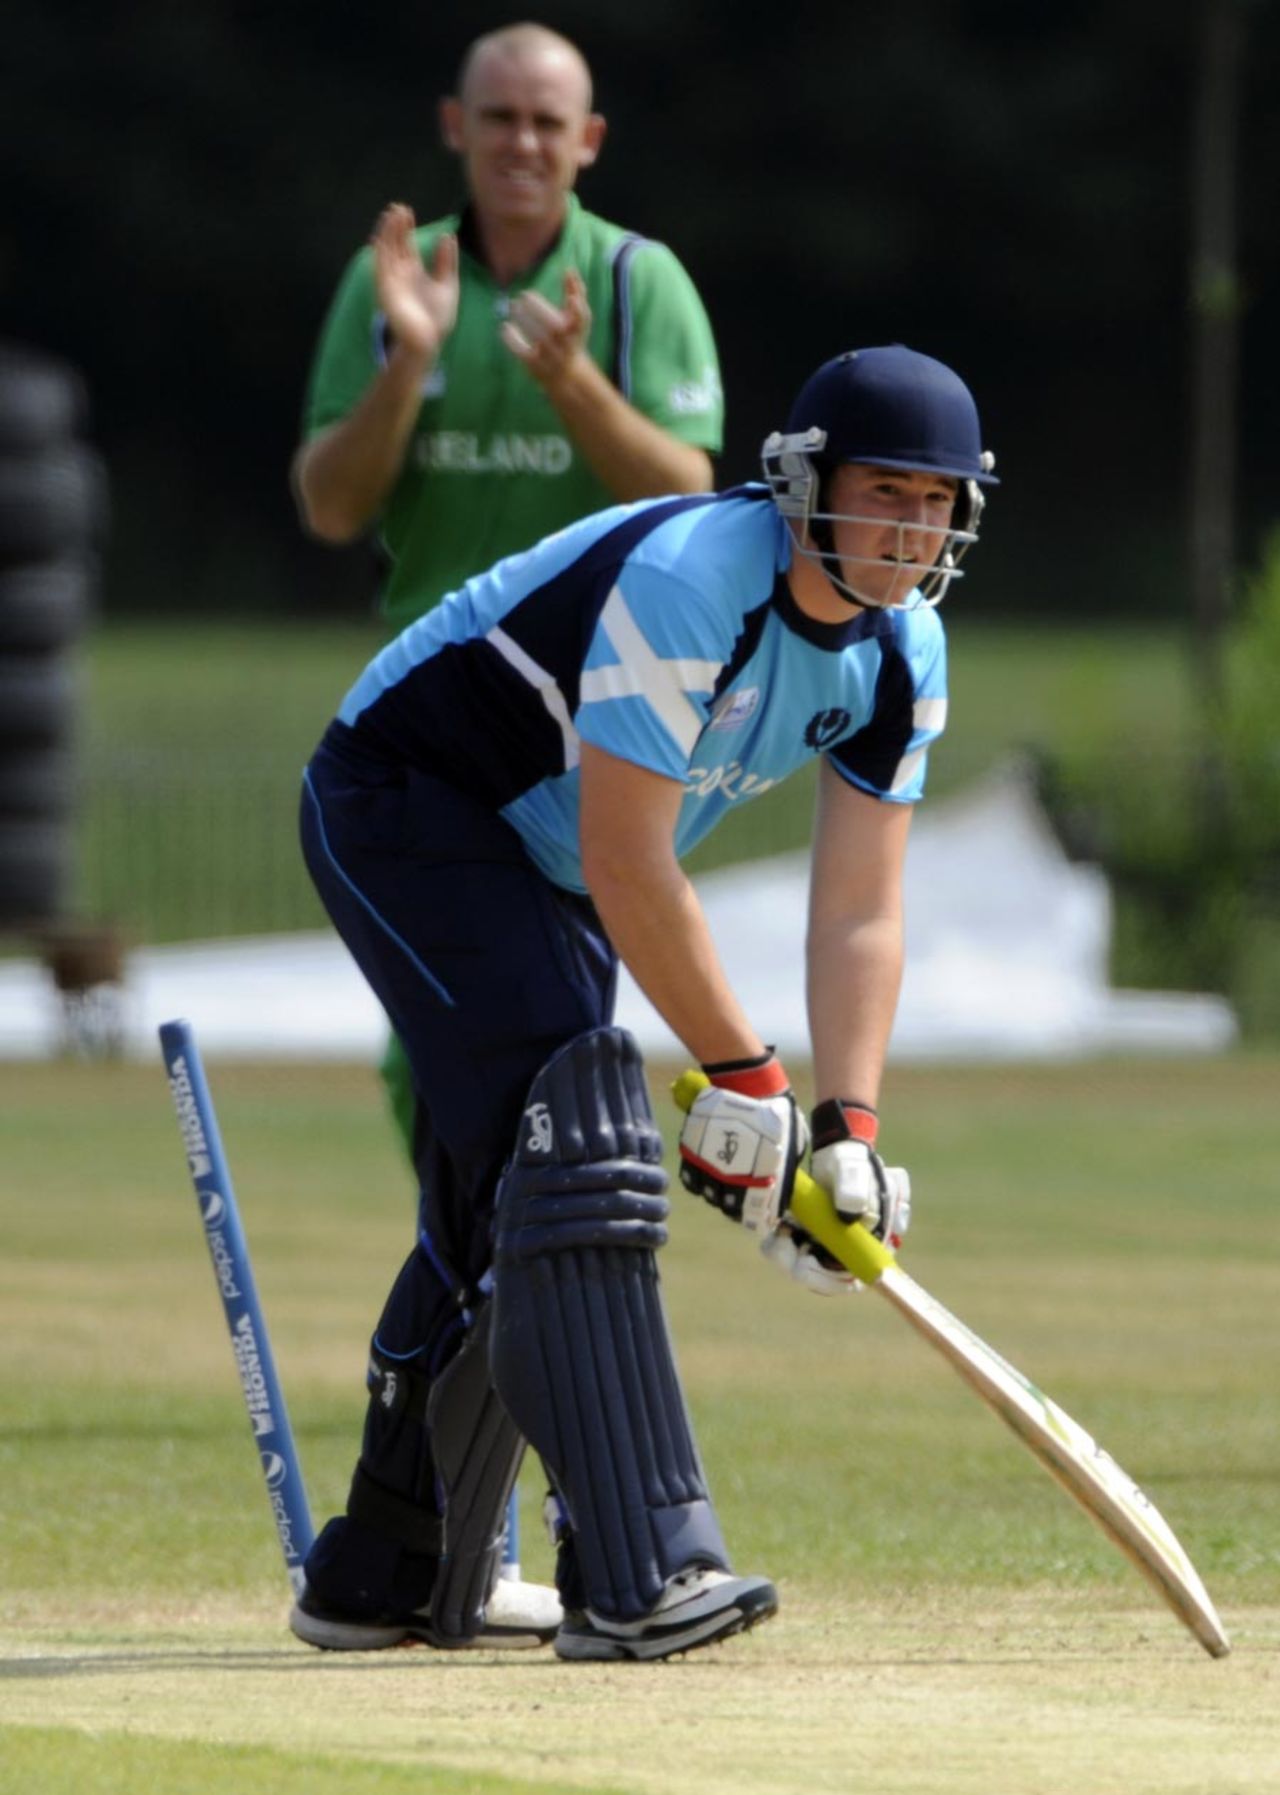 Scotland's Ollie Hairs is comprehensively bowled, Ireland v Scotland, ICC WCL Division 1, Voorburg, July 5, 2010